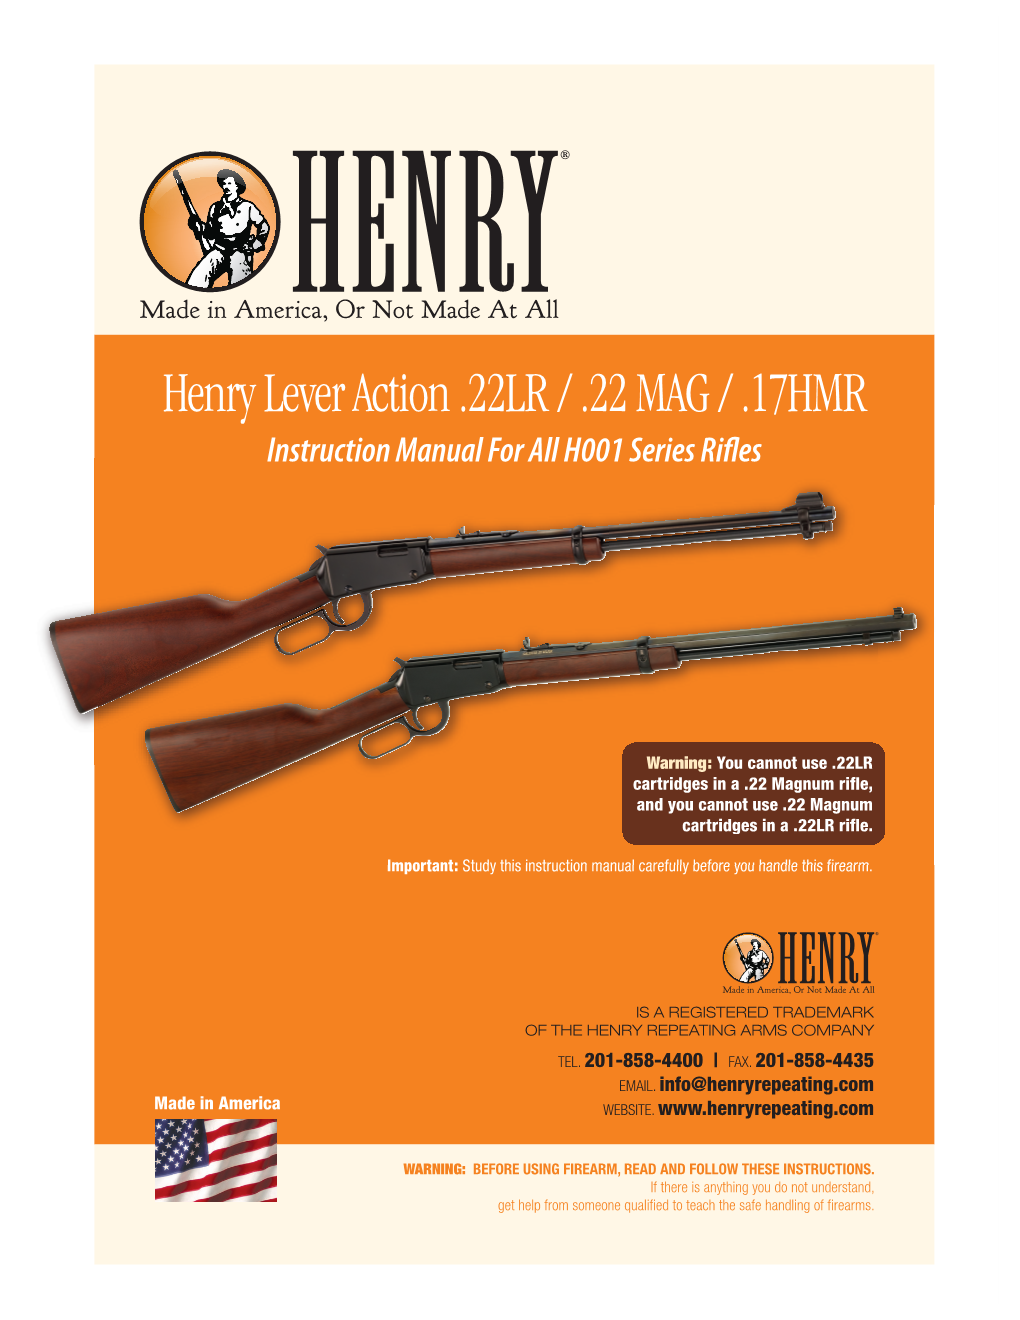 Lever Action .22LR / .22 MAG / .17HMR Instruction Manual for All H001 Series Rifles